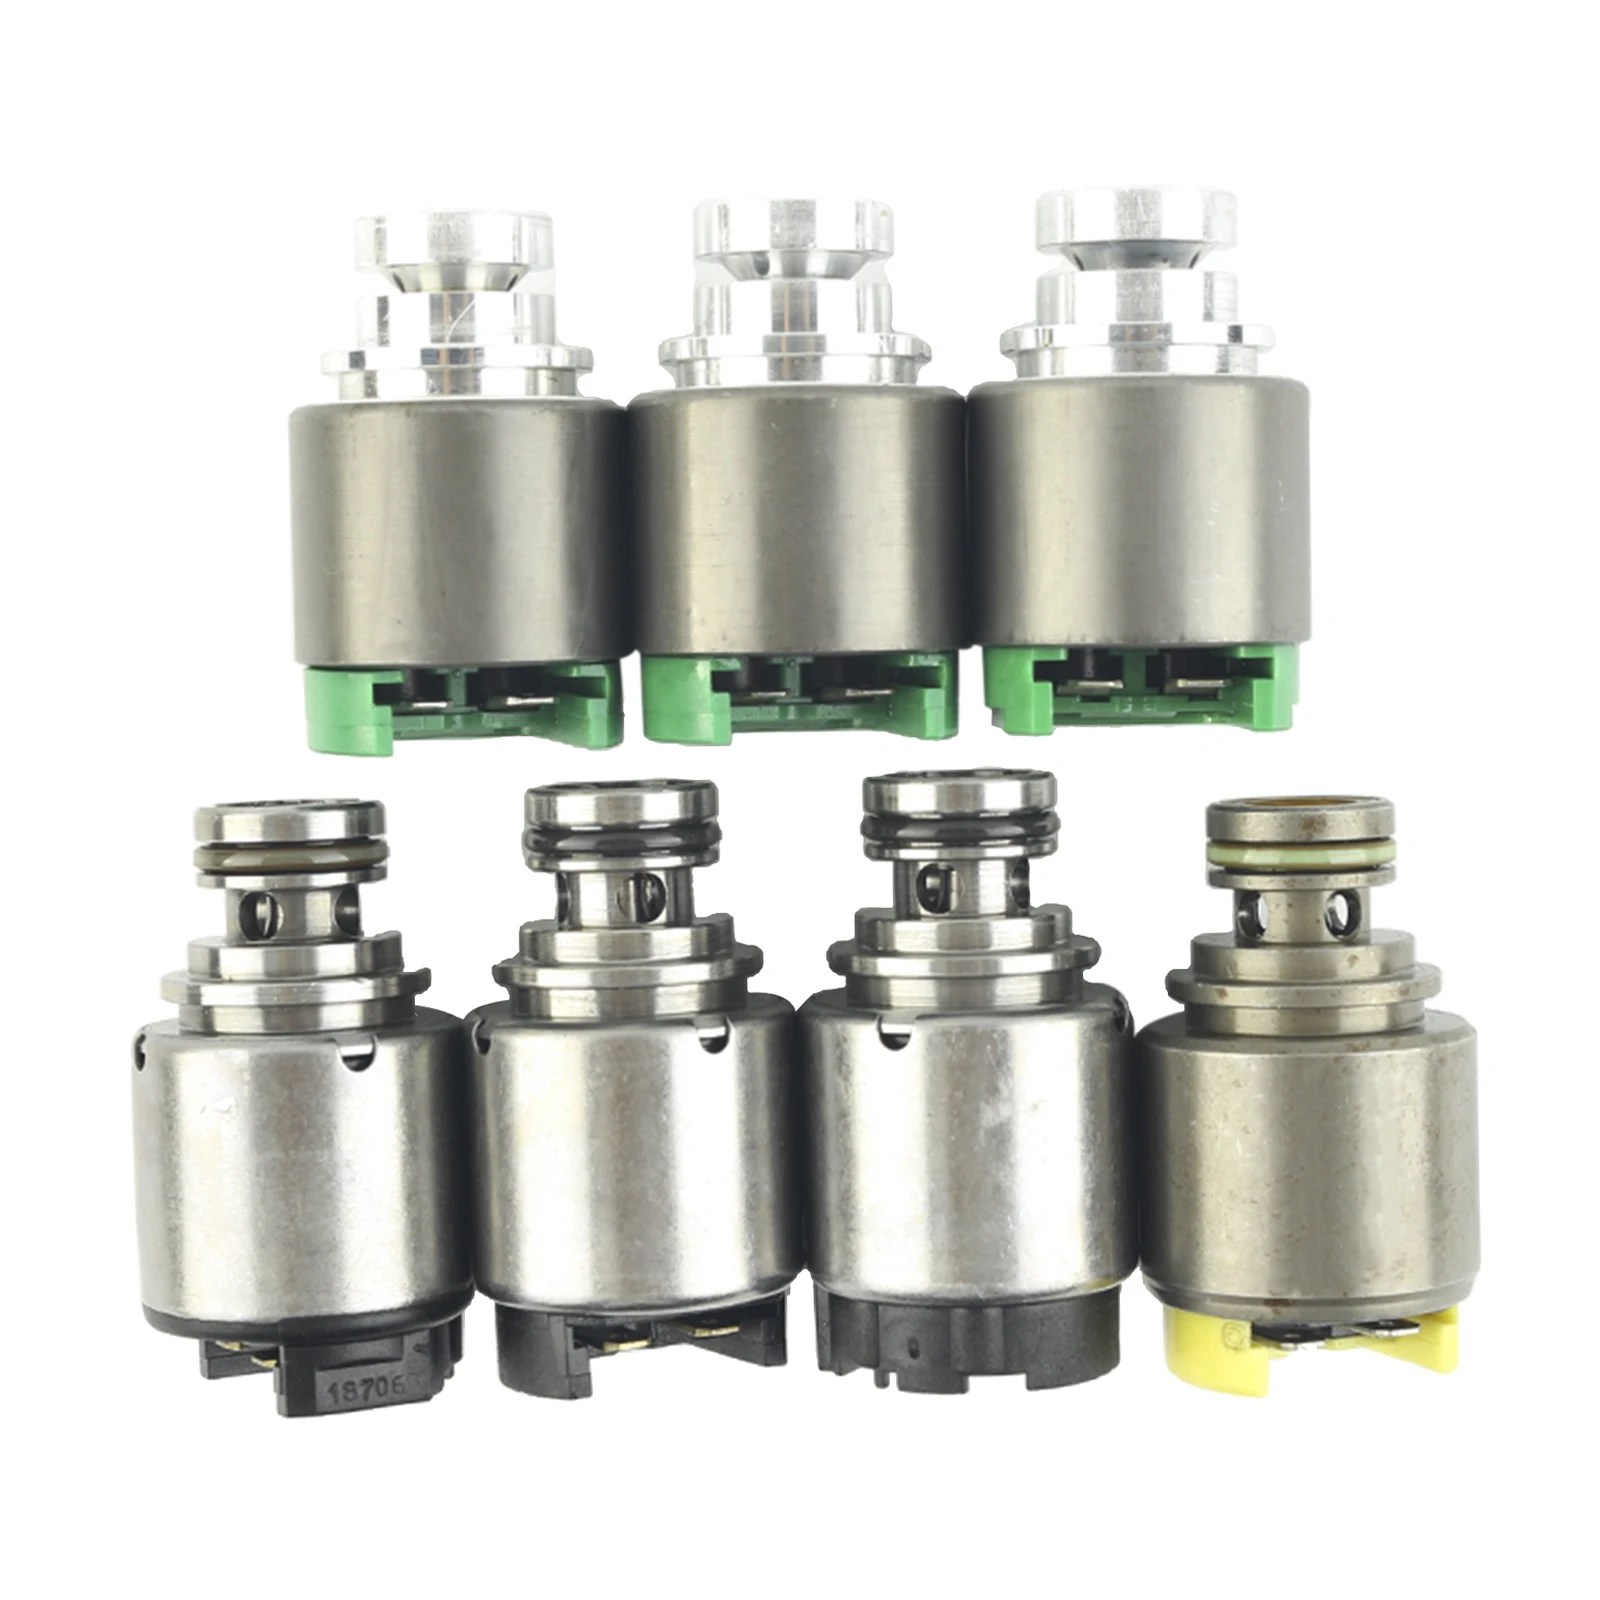 7PCS 5HP19 Transmission Solenoids for Audi A6 A8 S4 S6 RS6 ZF1068298035